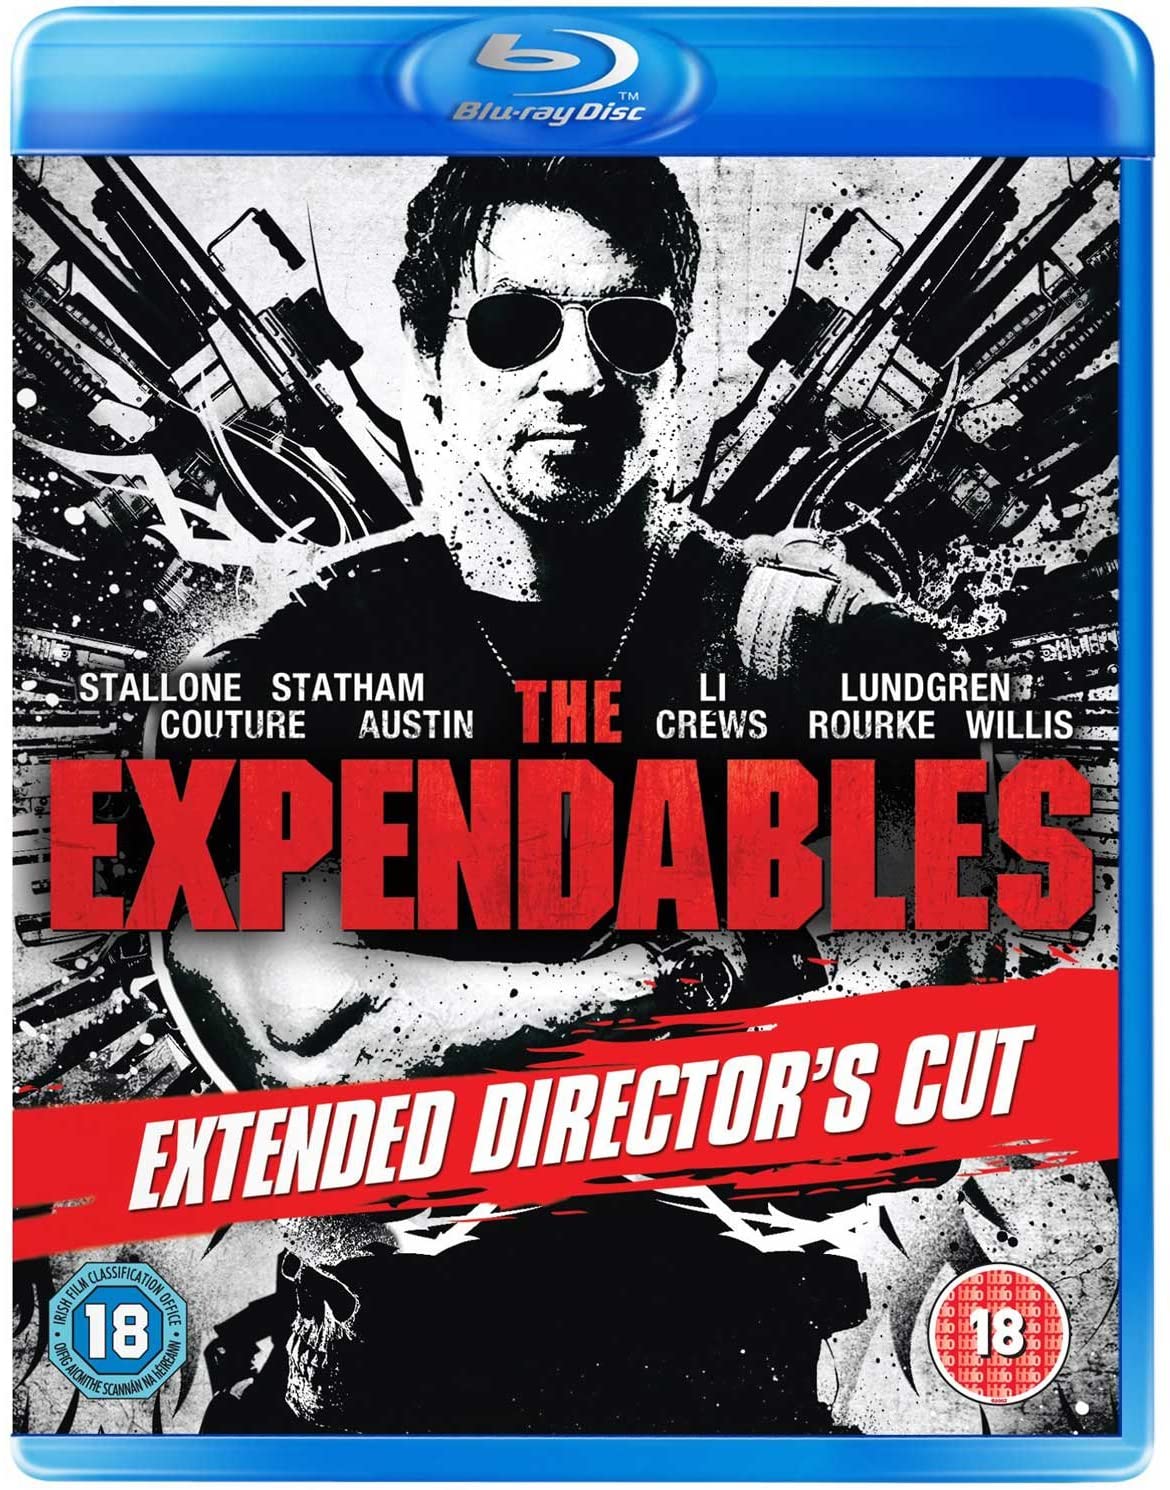 The Expendables-Extended Director's Cut [Blu-ray]